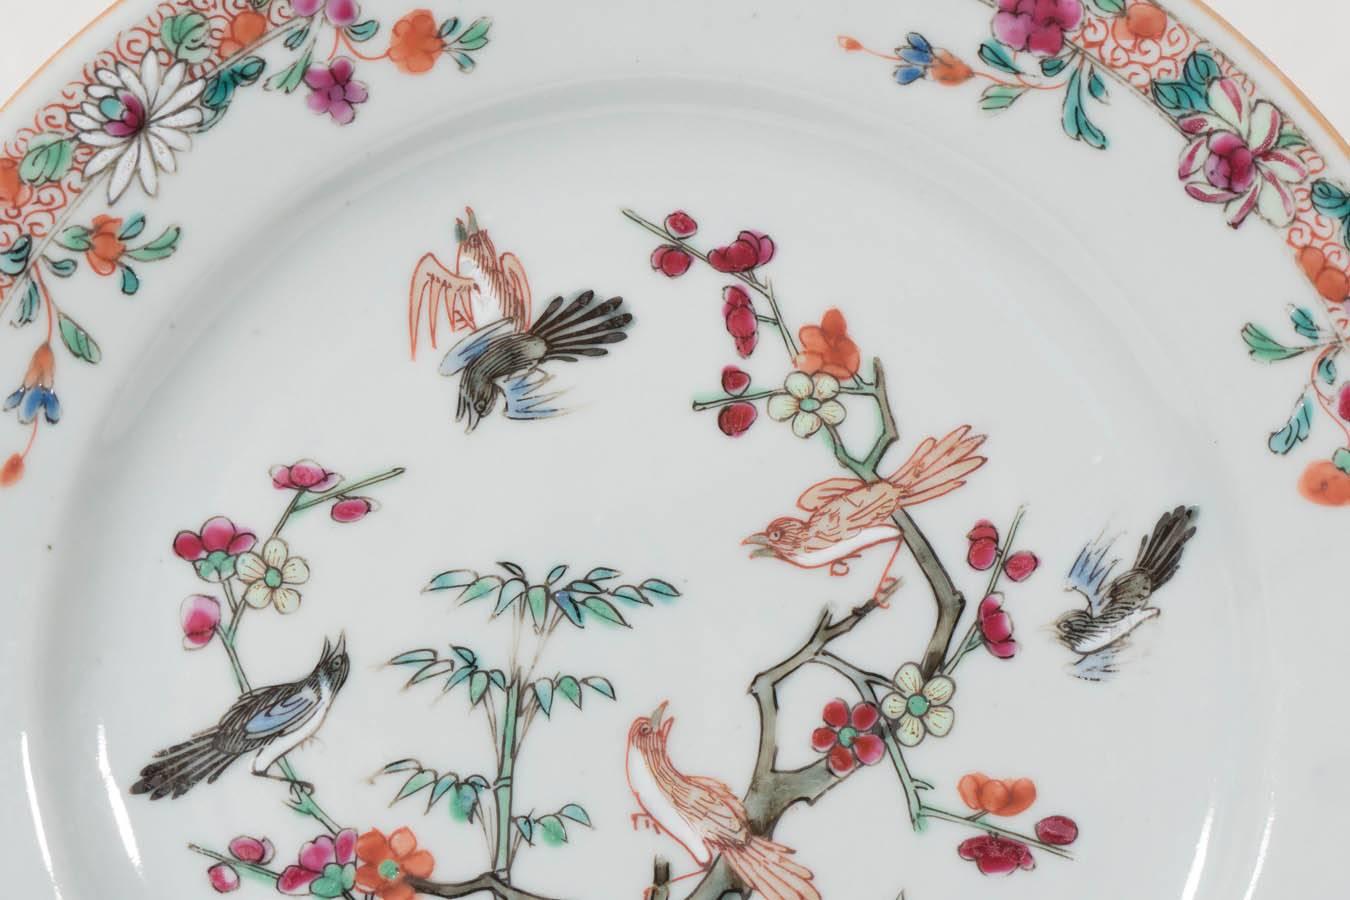 Hand-Painted Antique Chinese Porcelain Dishes Symbolizing Youth Beauty and Good Fortune